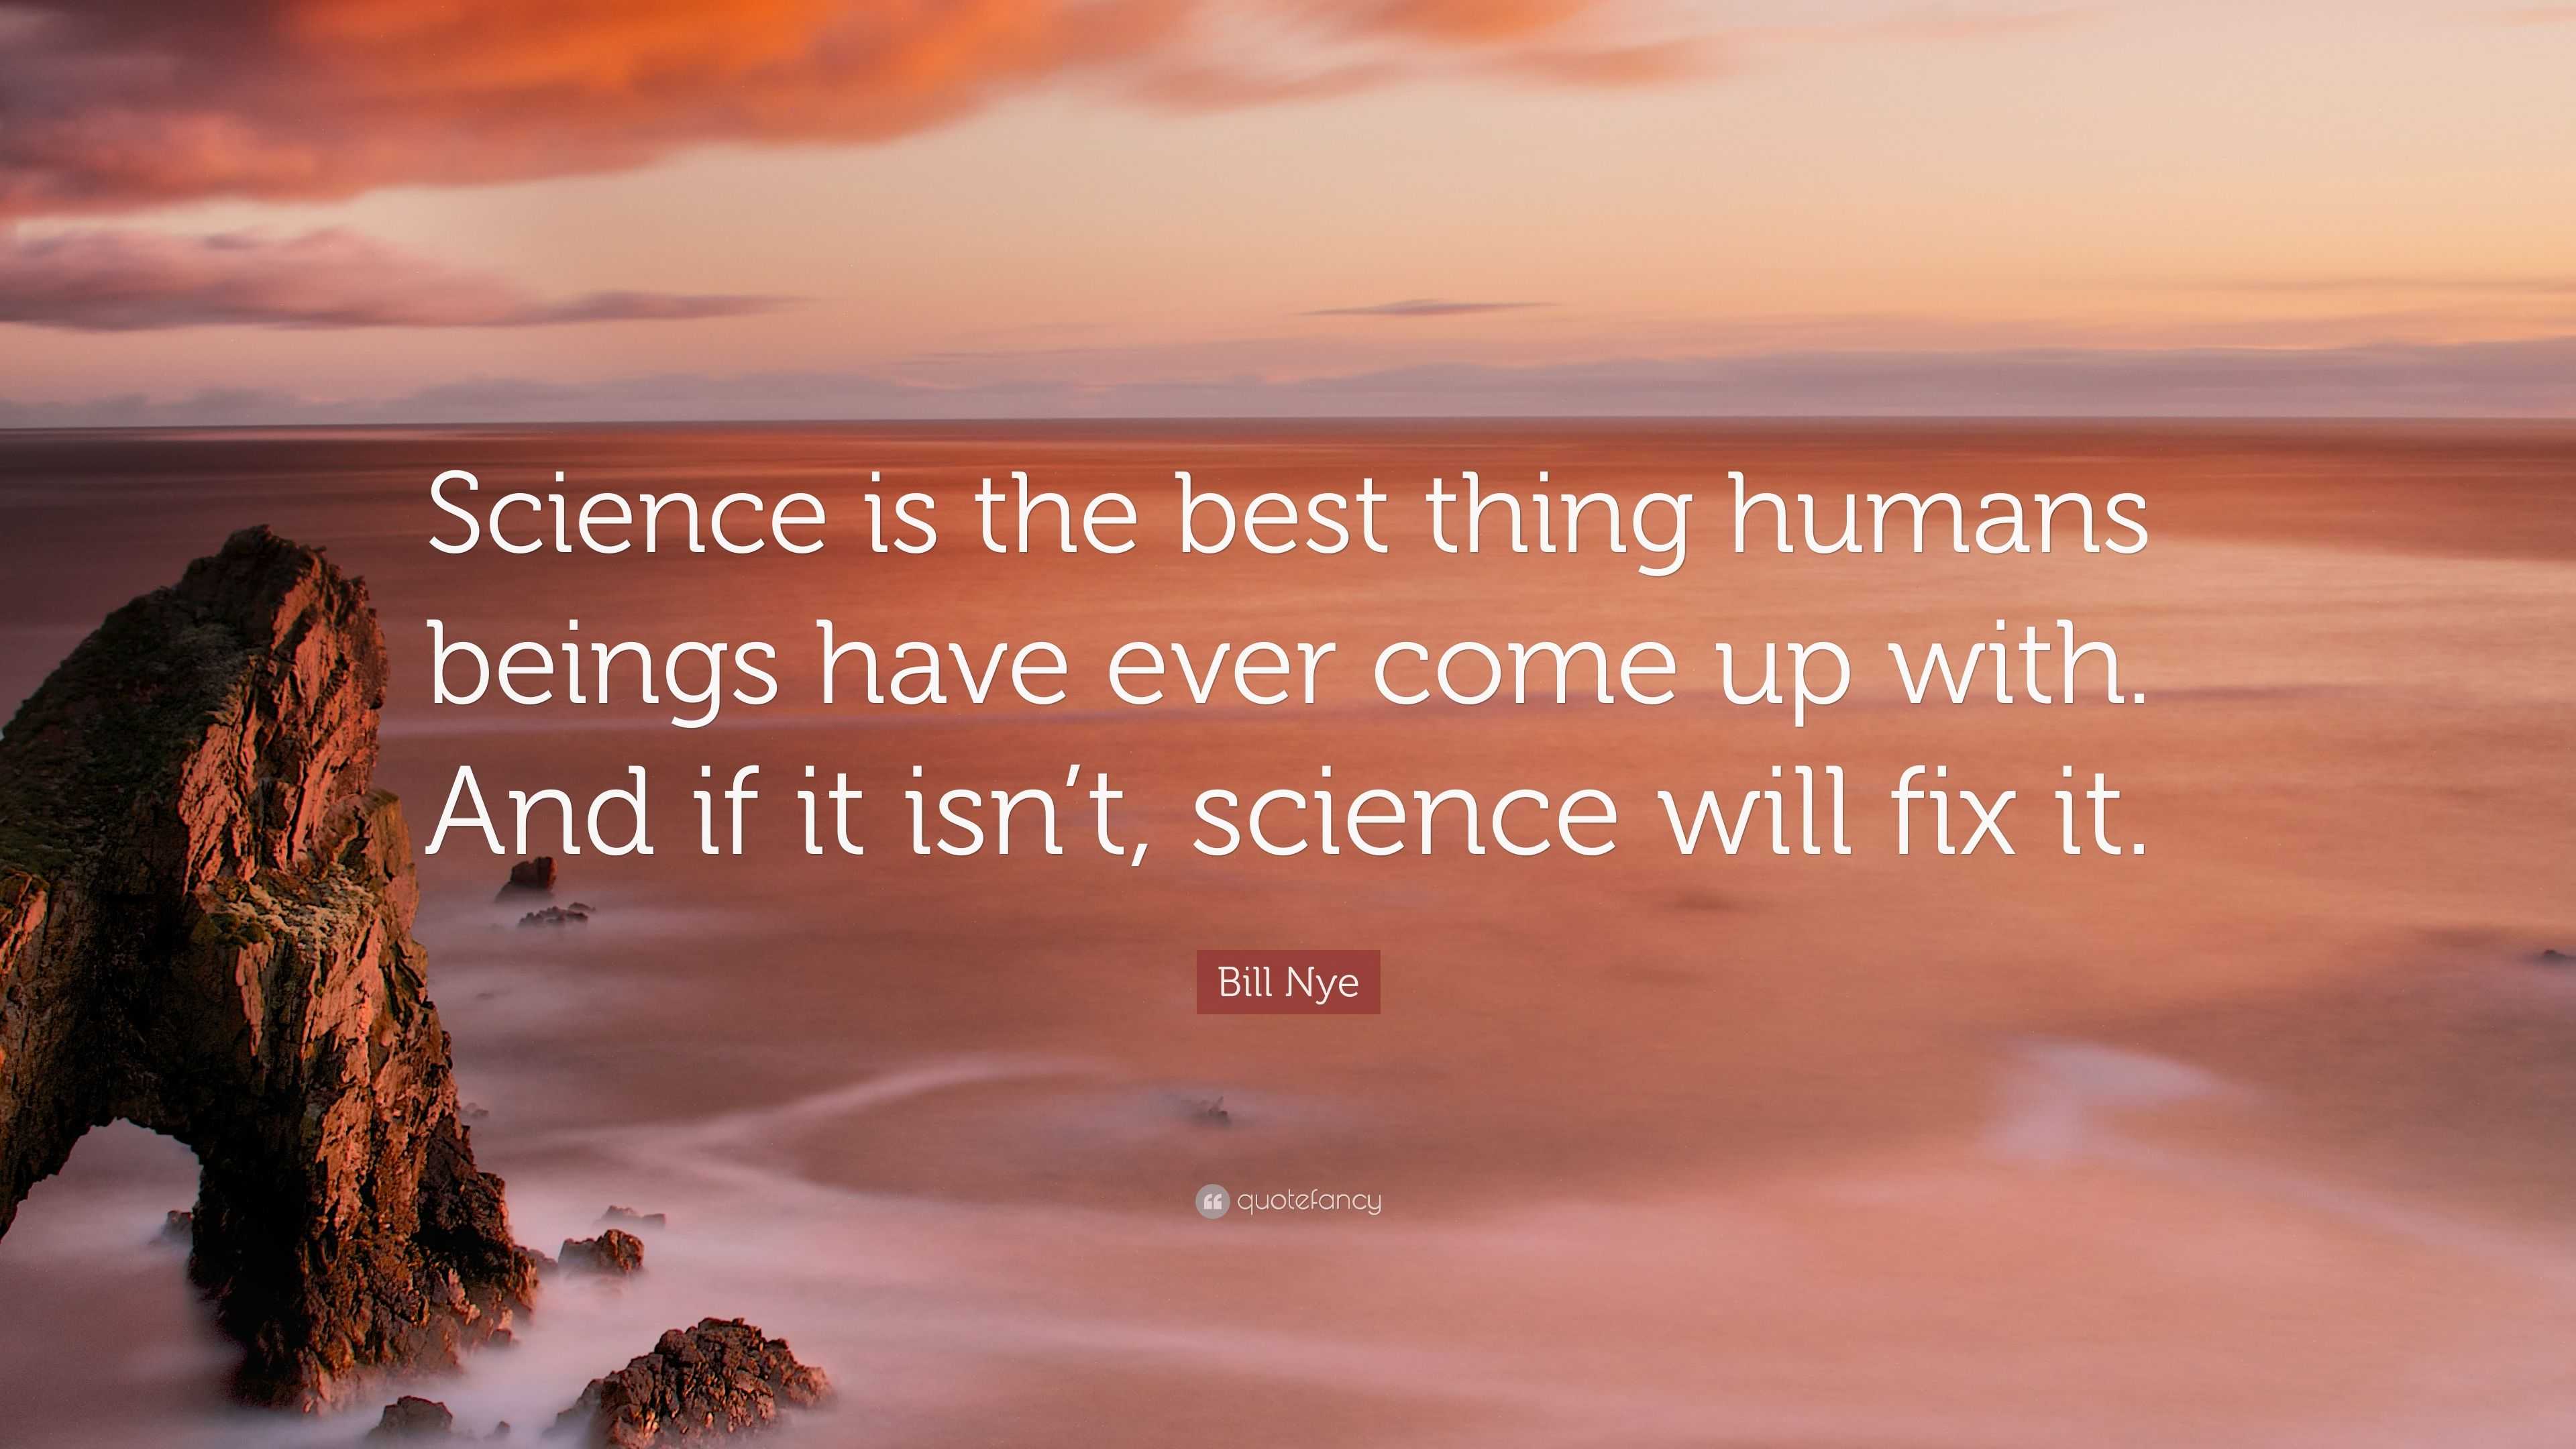 Bill Nye Quote “science Is The Best Thing Humans Beings Have Ever Come